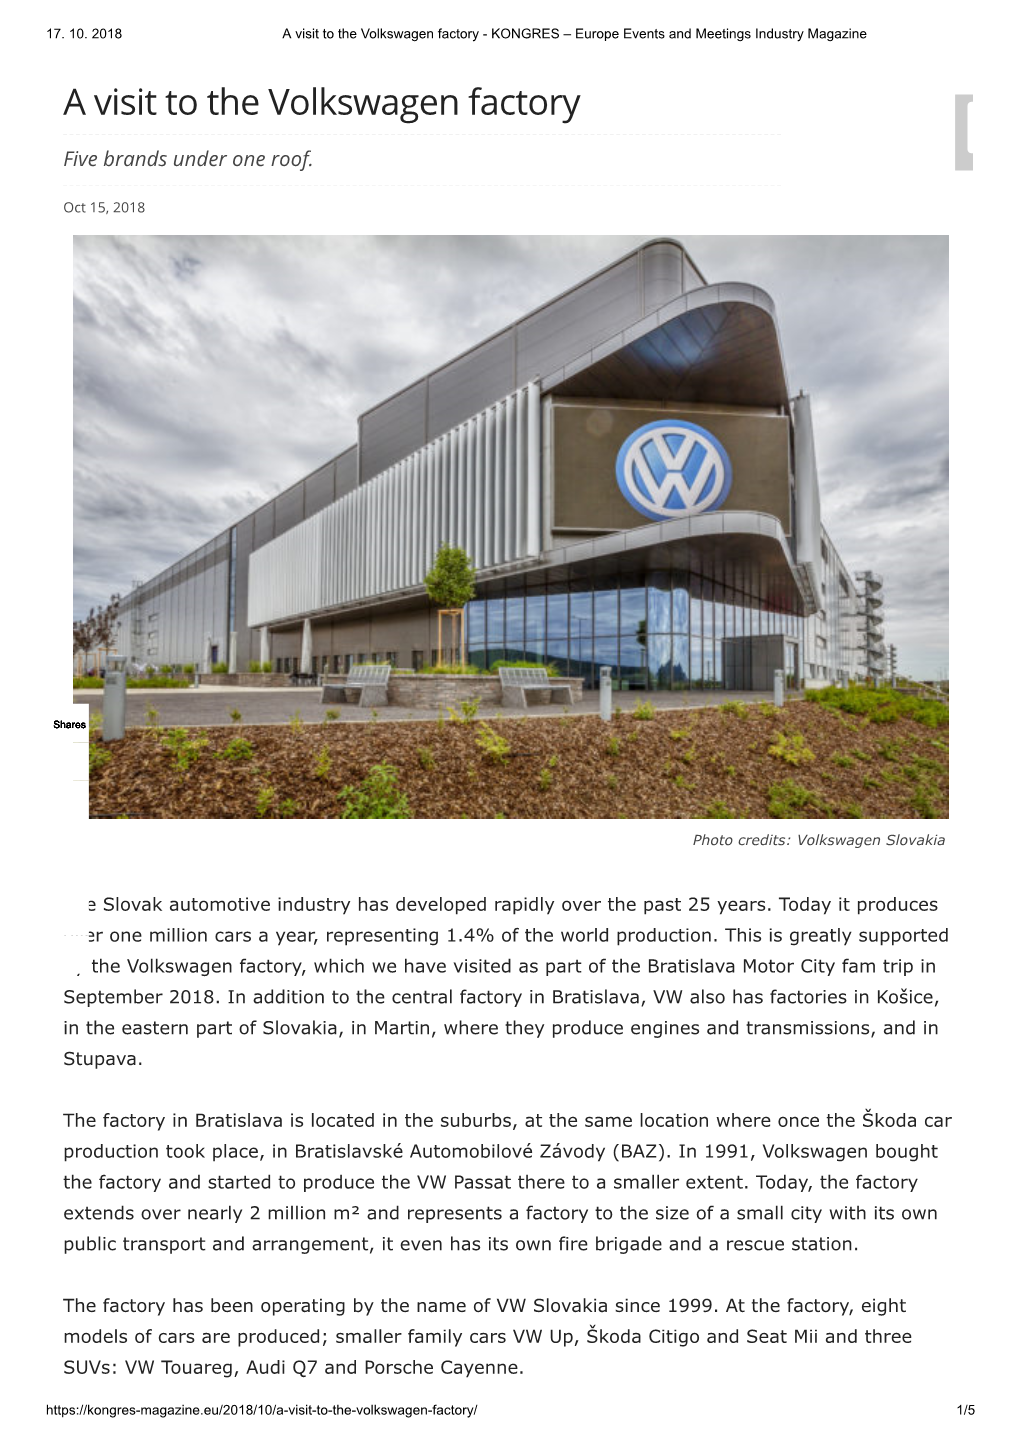 A Visit to the Volkswagen Factory - KONGRES – Europe Events and Meetings Industry Magazine